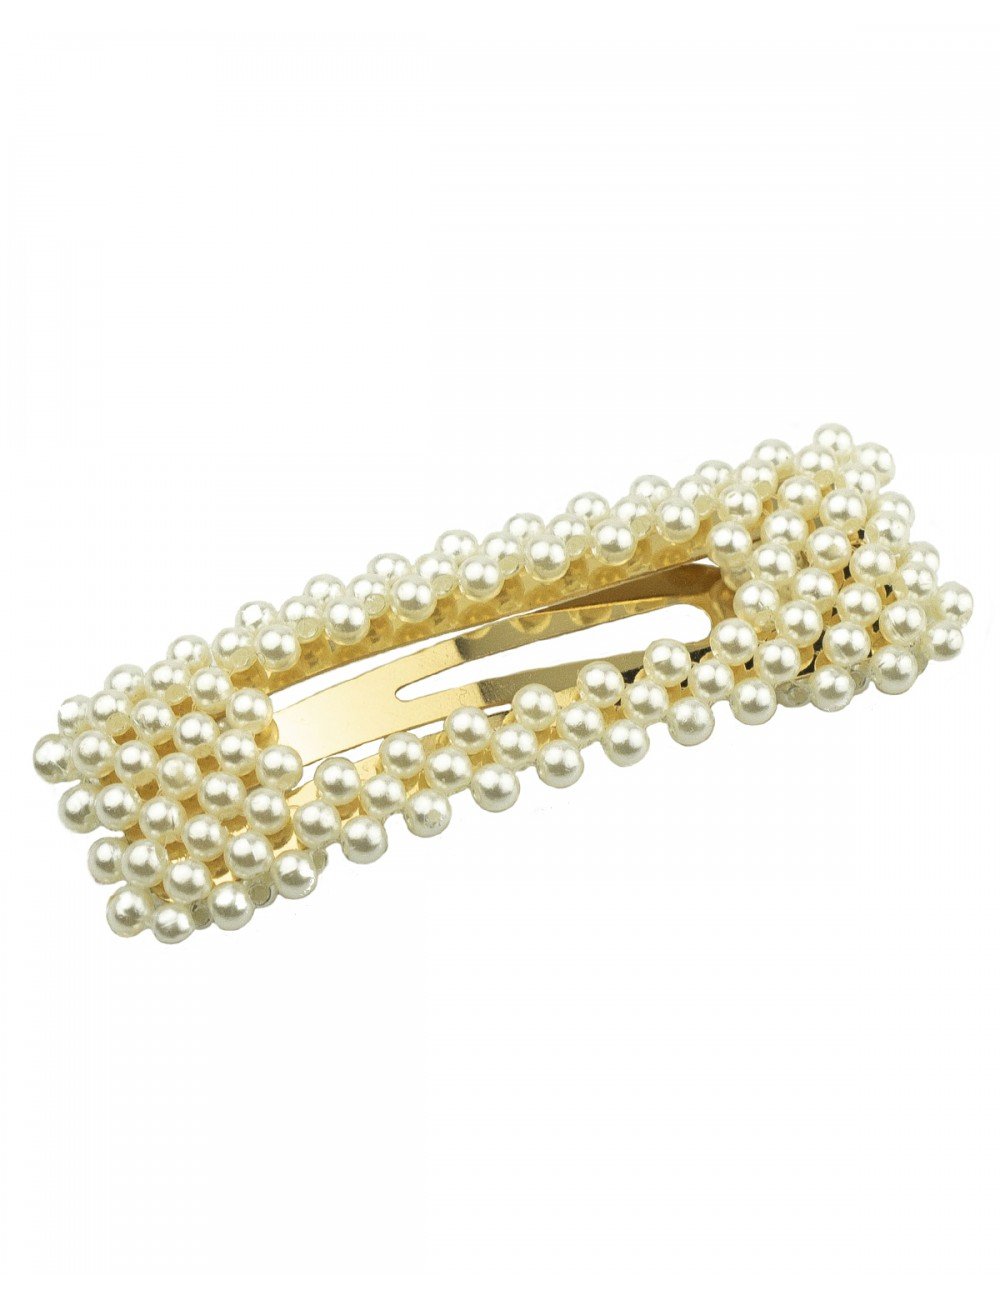 Pin on Accessories & Jewellery